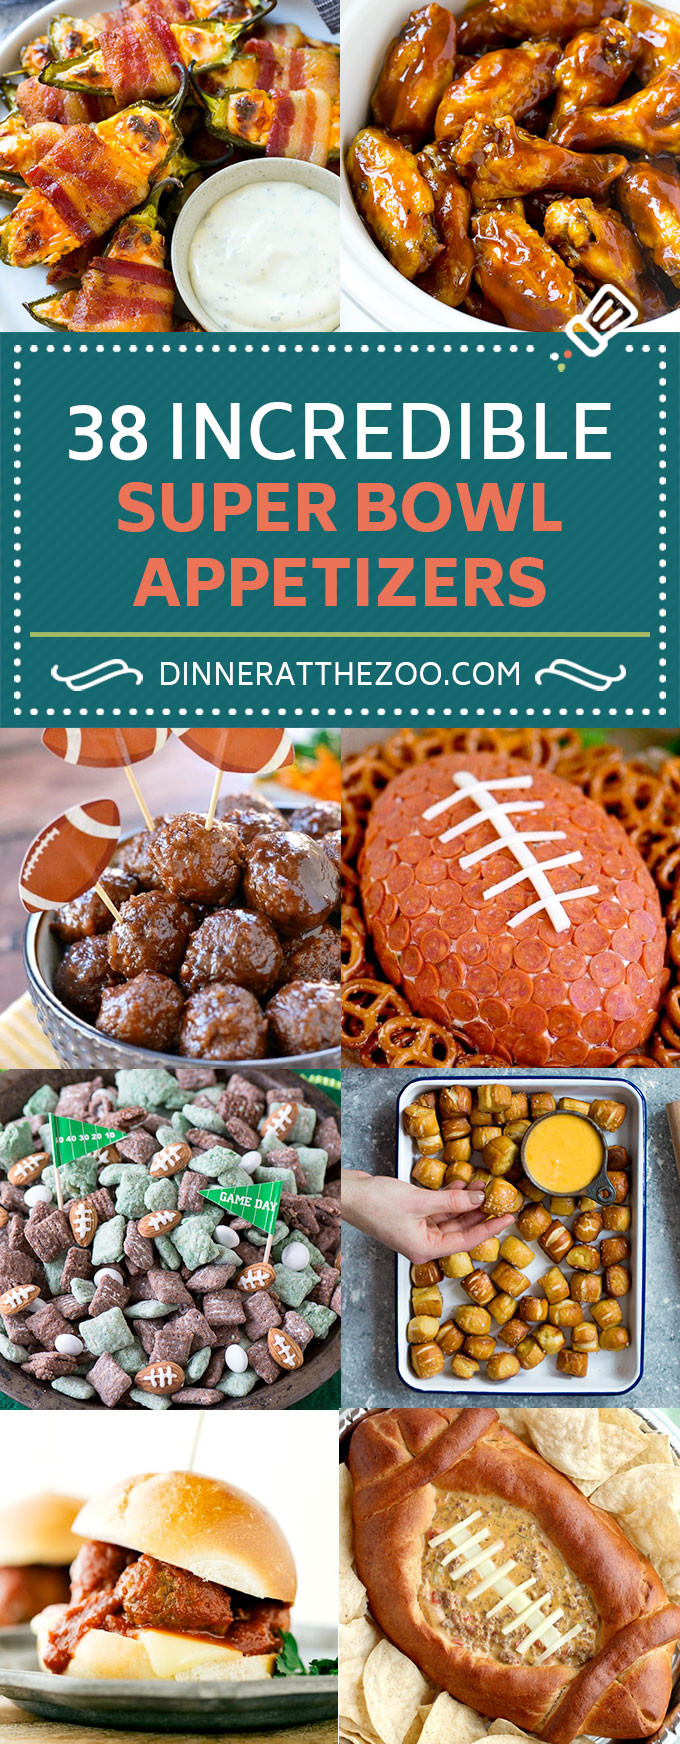 Recipes For The Super Bowl
 45 Incredible Super Bowl Appetizer Recipes Dinner at the Zoo